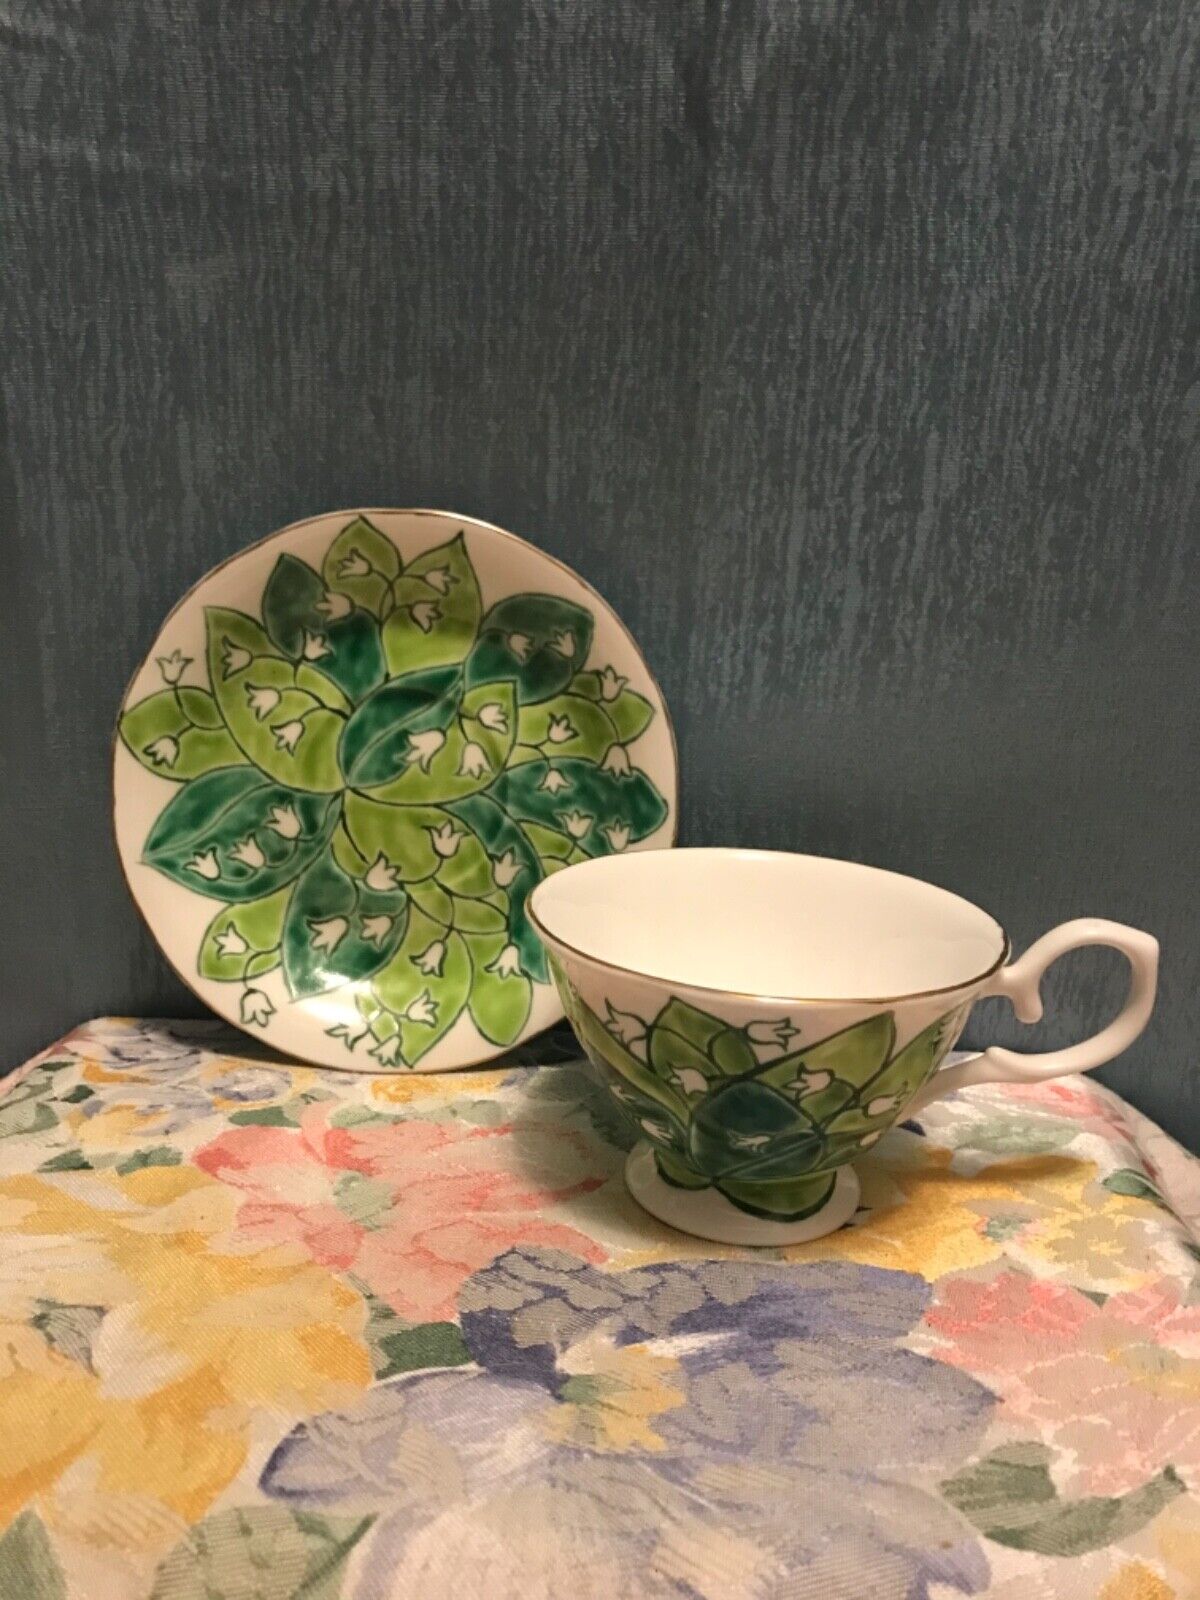 RARE KAROLINA LEHMAN HAND PAINTED LILY OF THE VALLEY TEACUP & SAUCER 